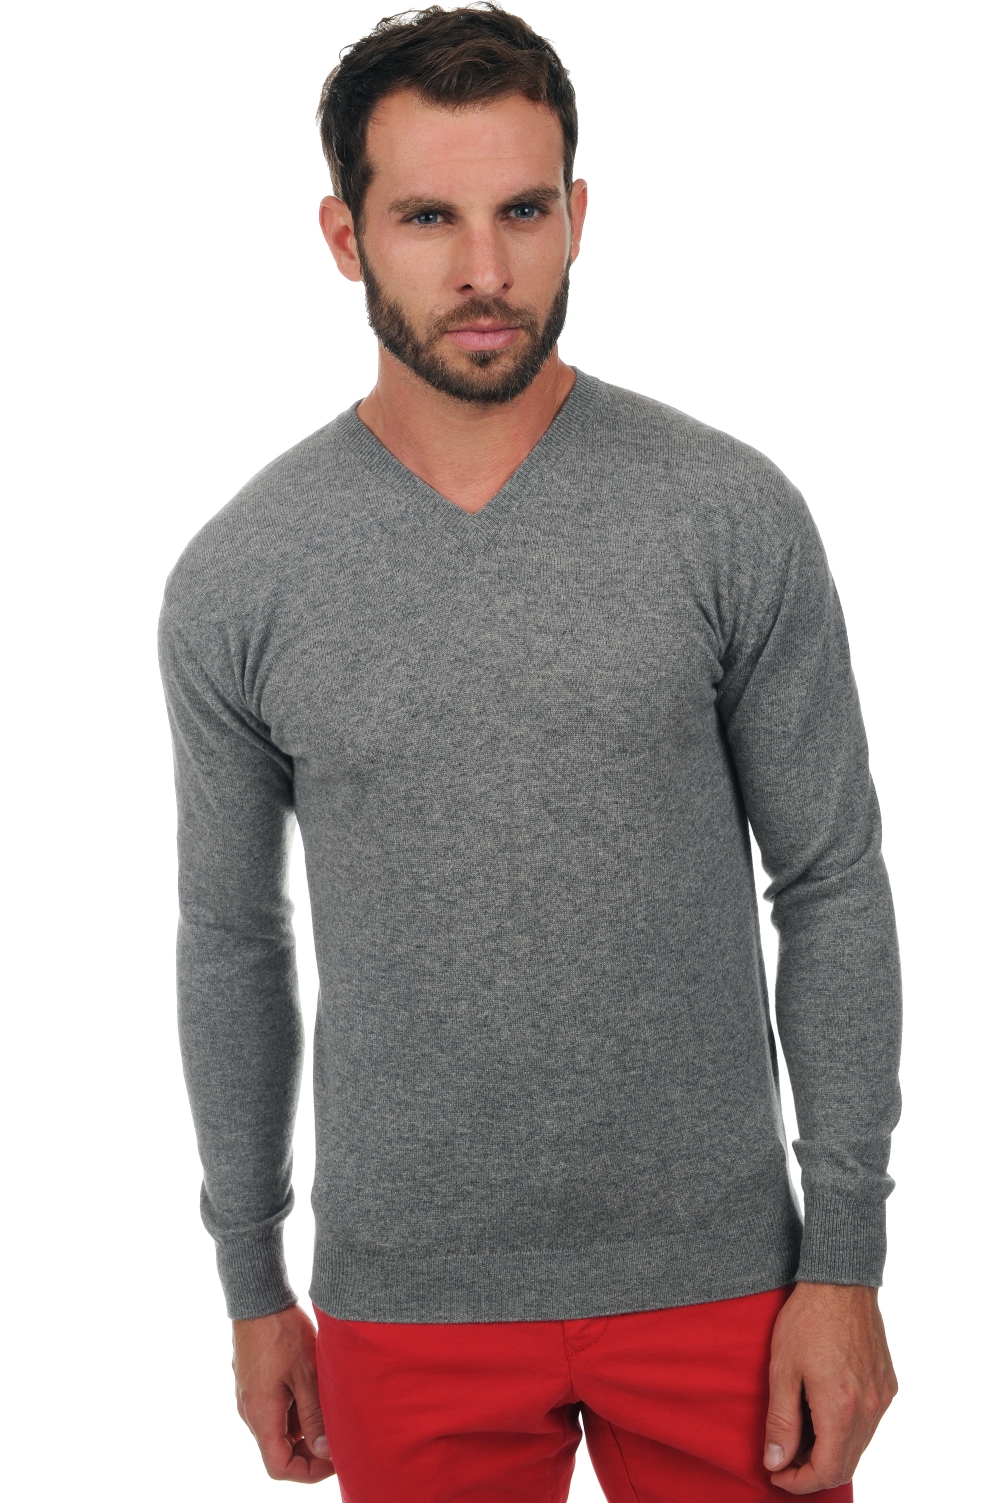 Cachemire pull homme maddox gris chine xl